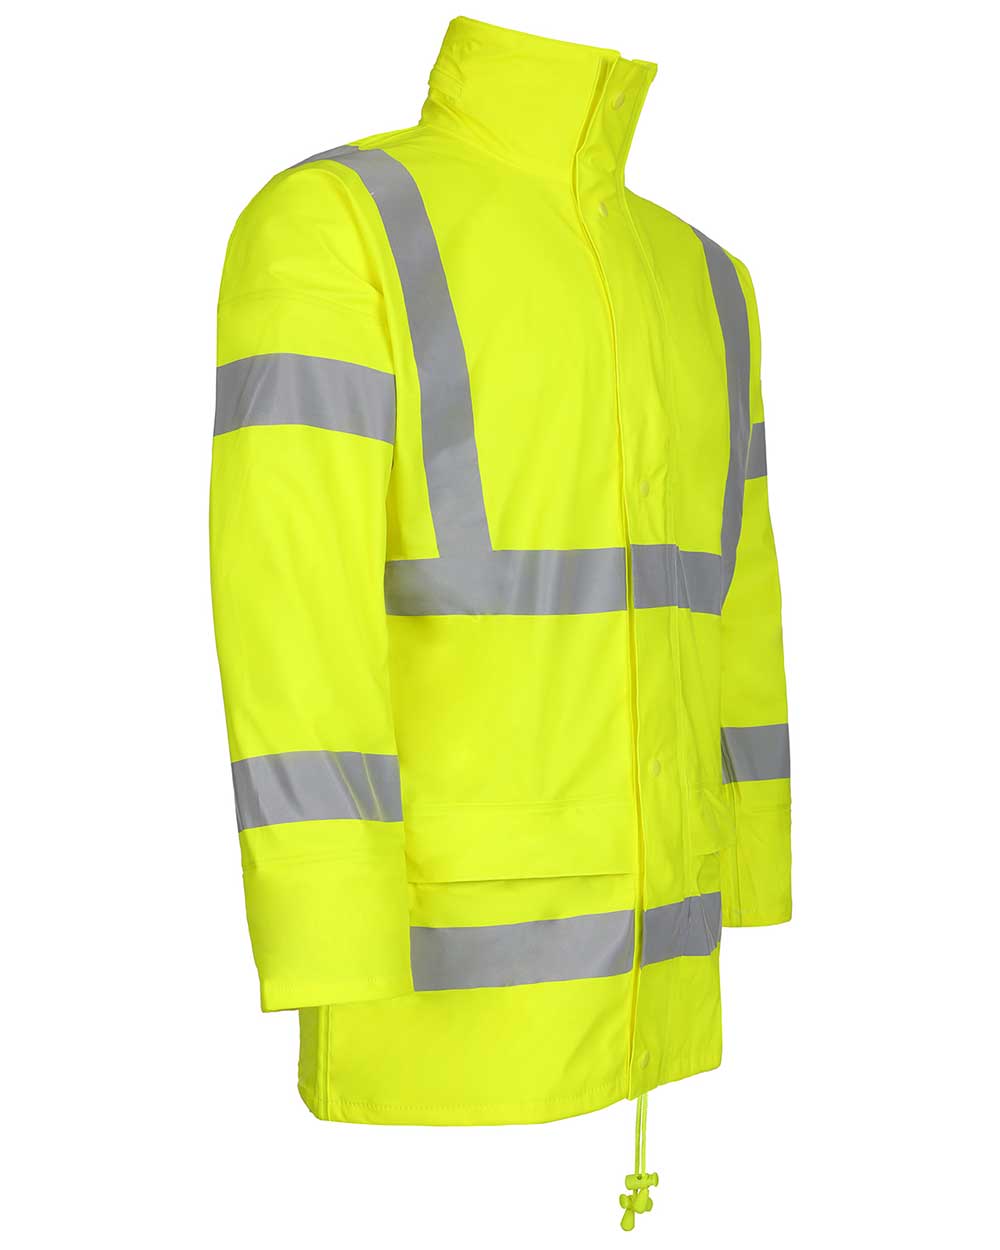 Right side view Fort Air Reflex Waterproof Hi-vis Jacket in yellow with reflective strips